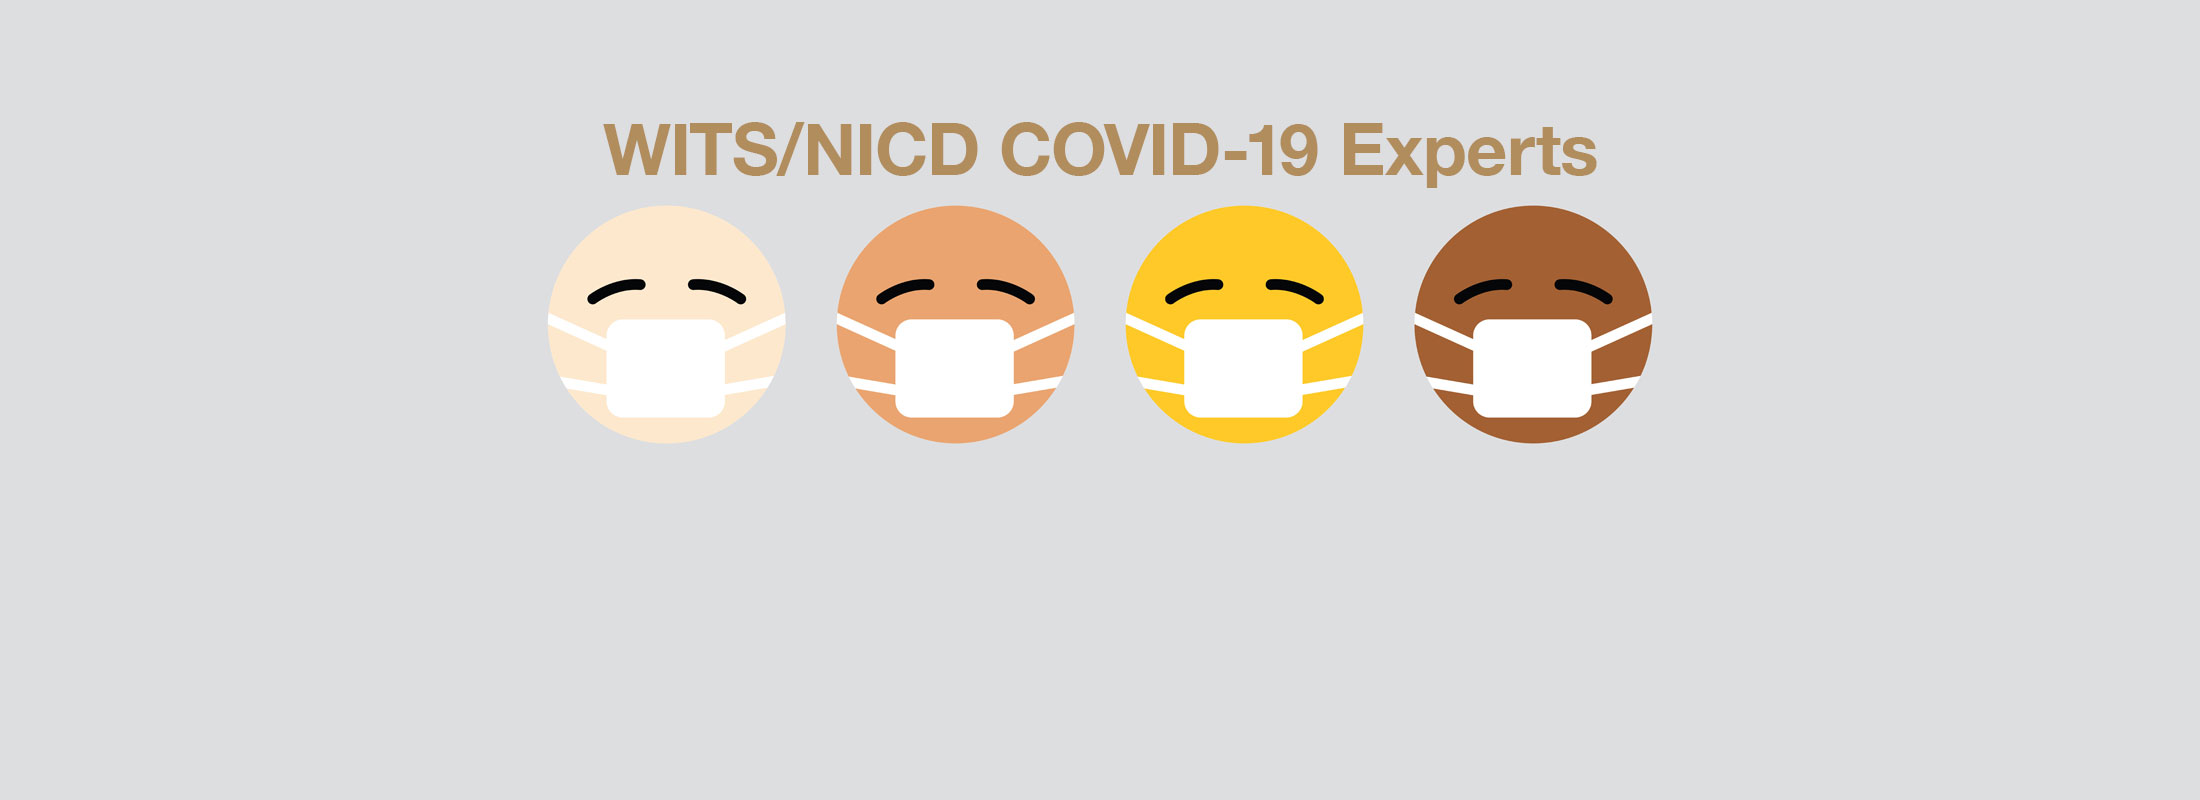 COVID-19 Wits and Wits/NICD experts